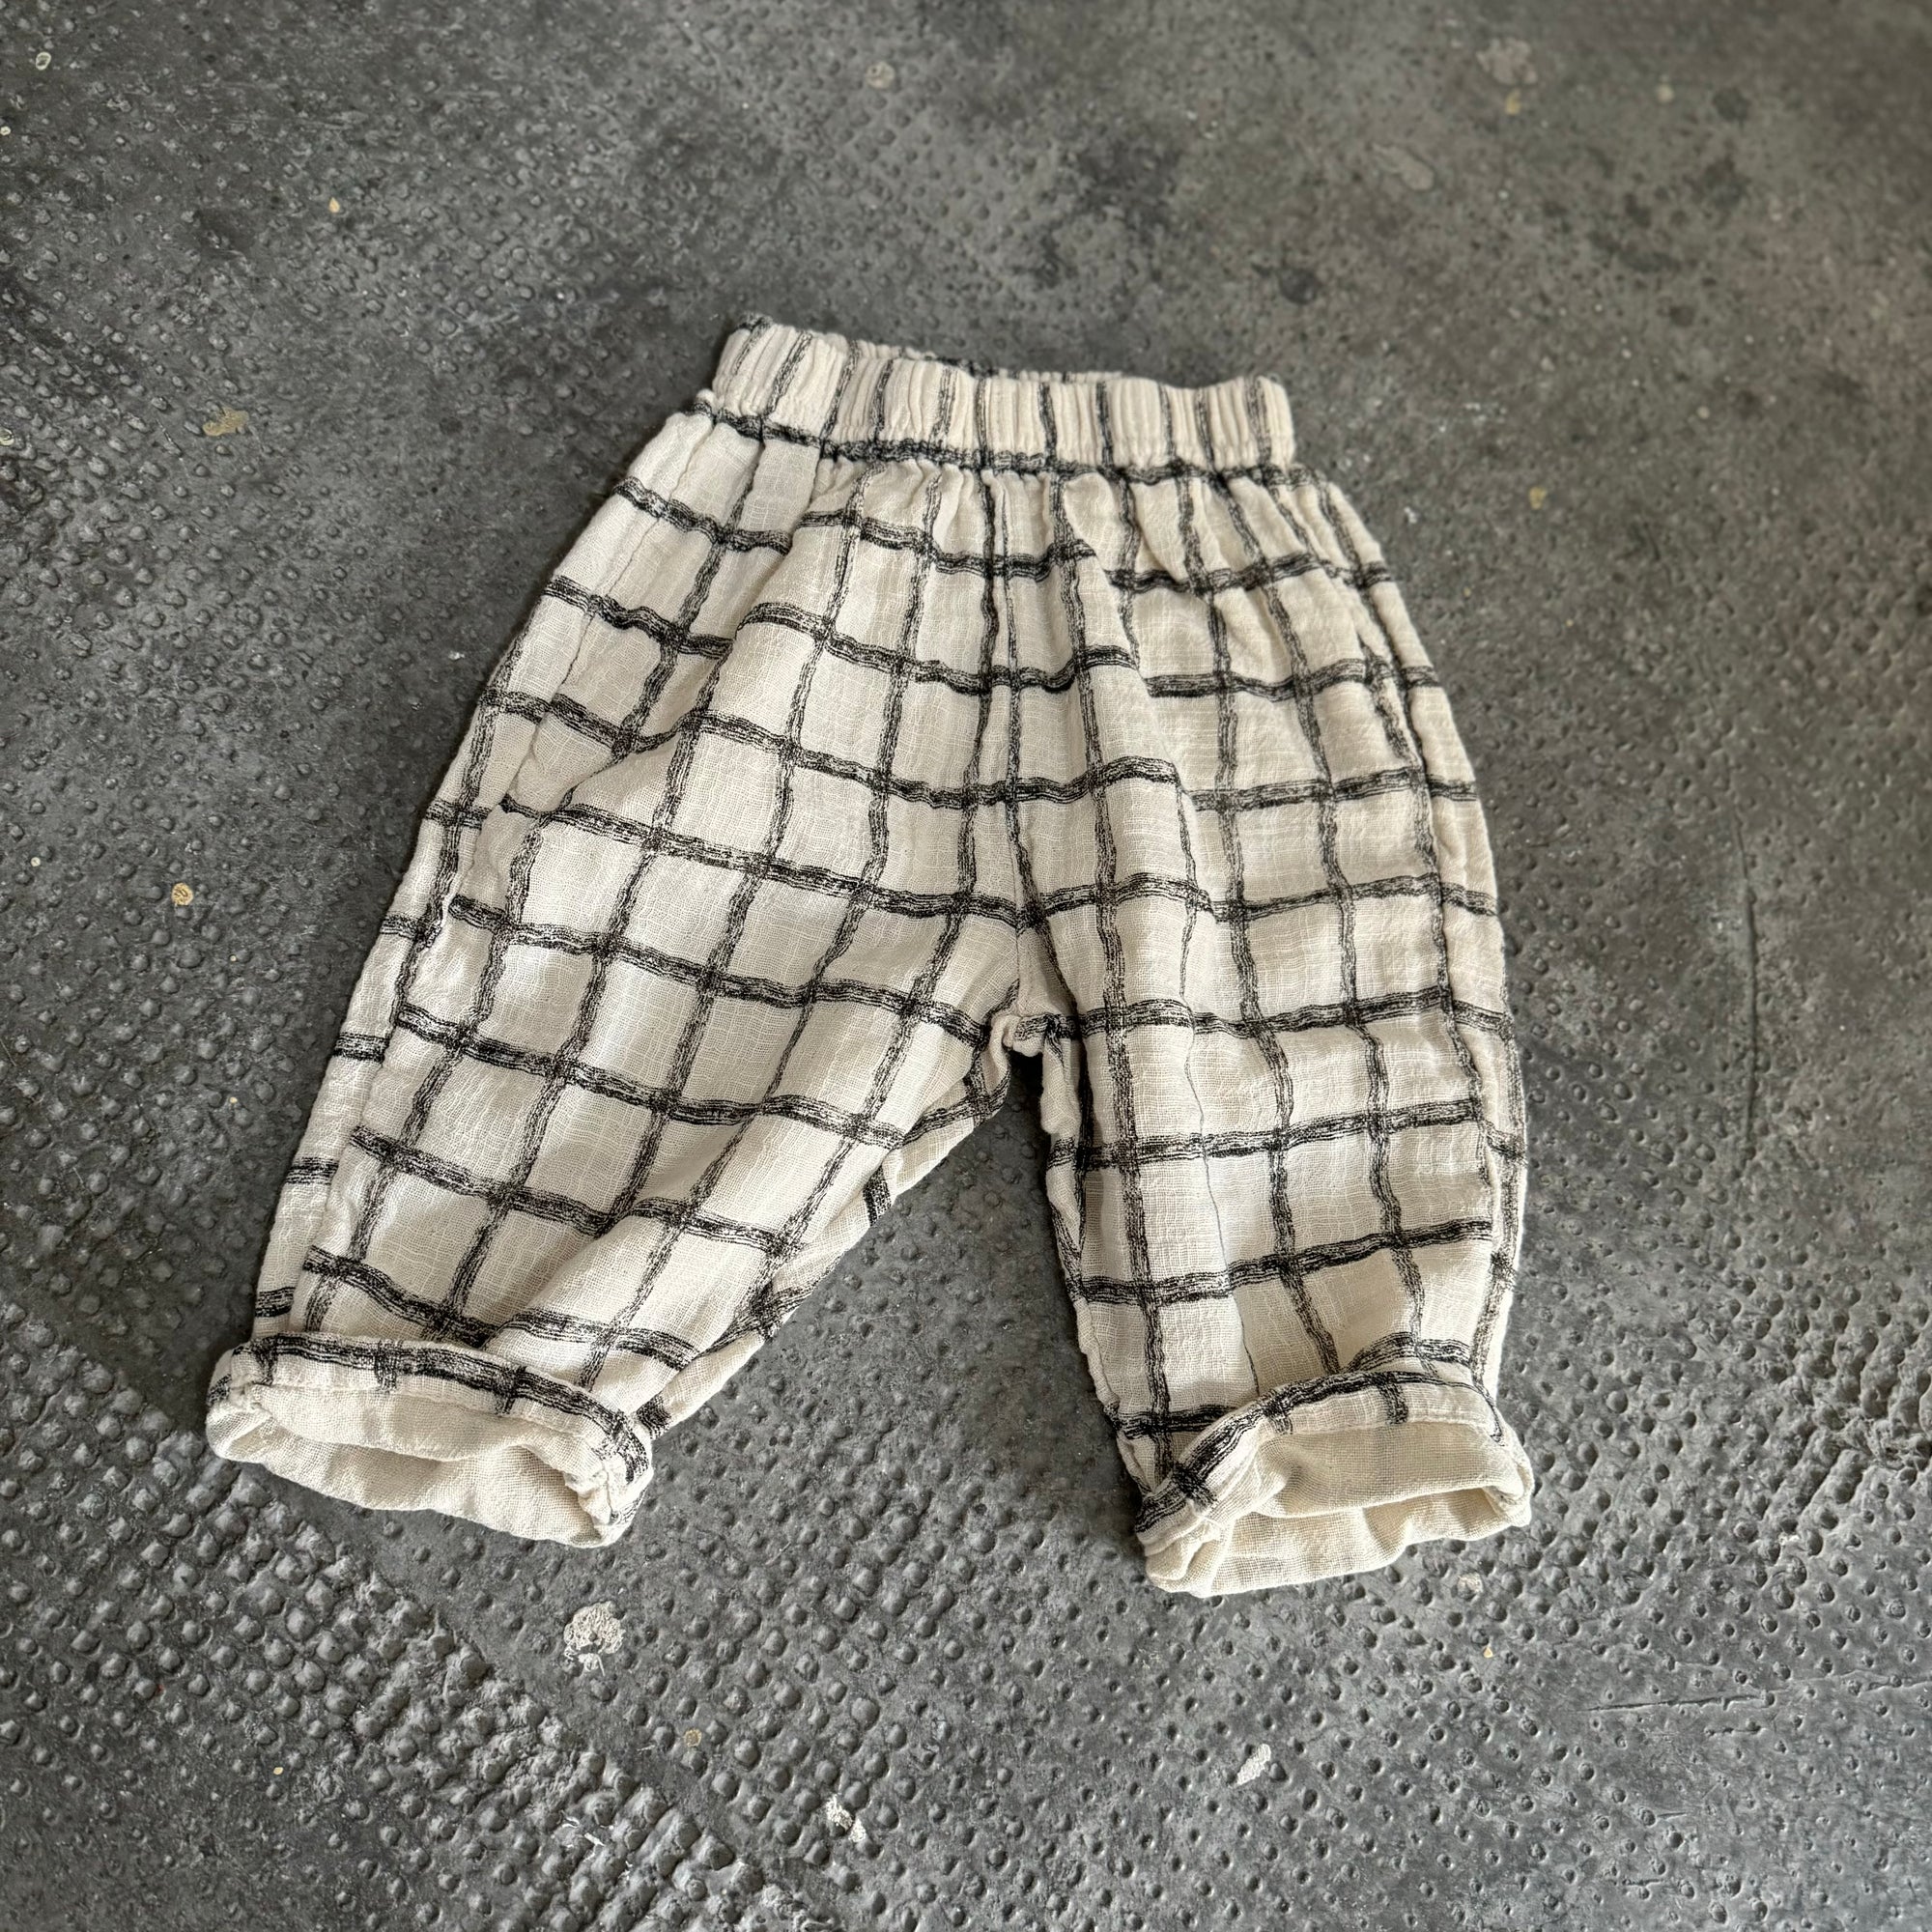 Gauze Pants - Check Charcoal find Stylish Fashion for Little People- at Little Foxx Concept Store